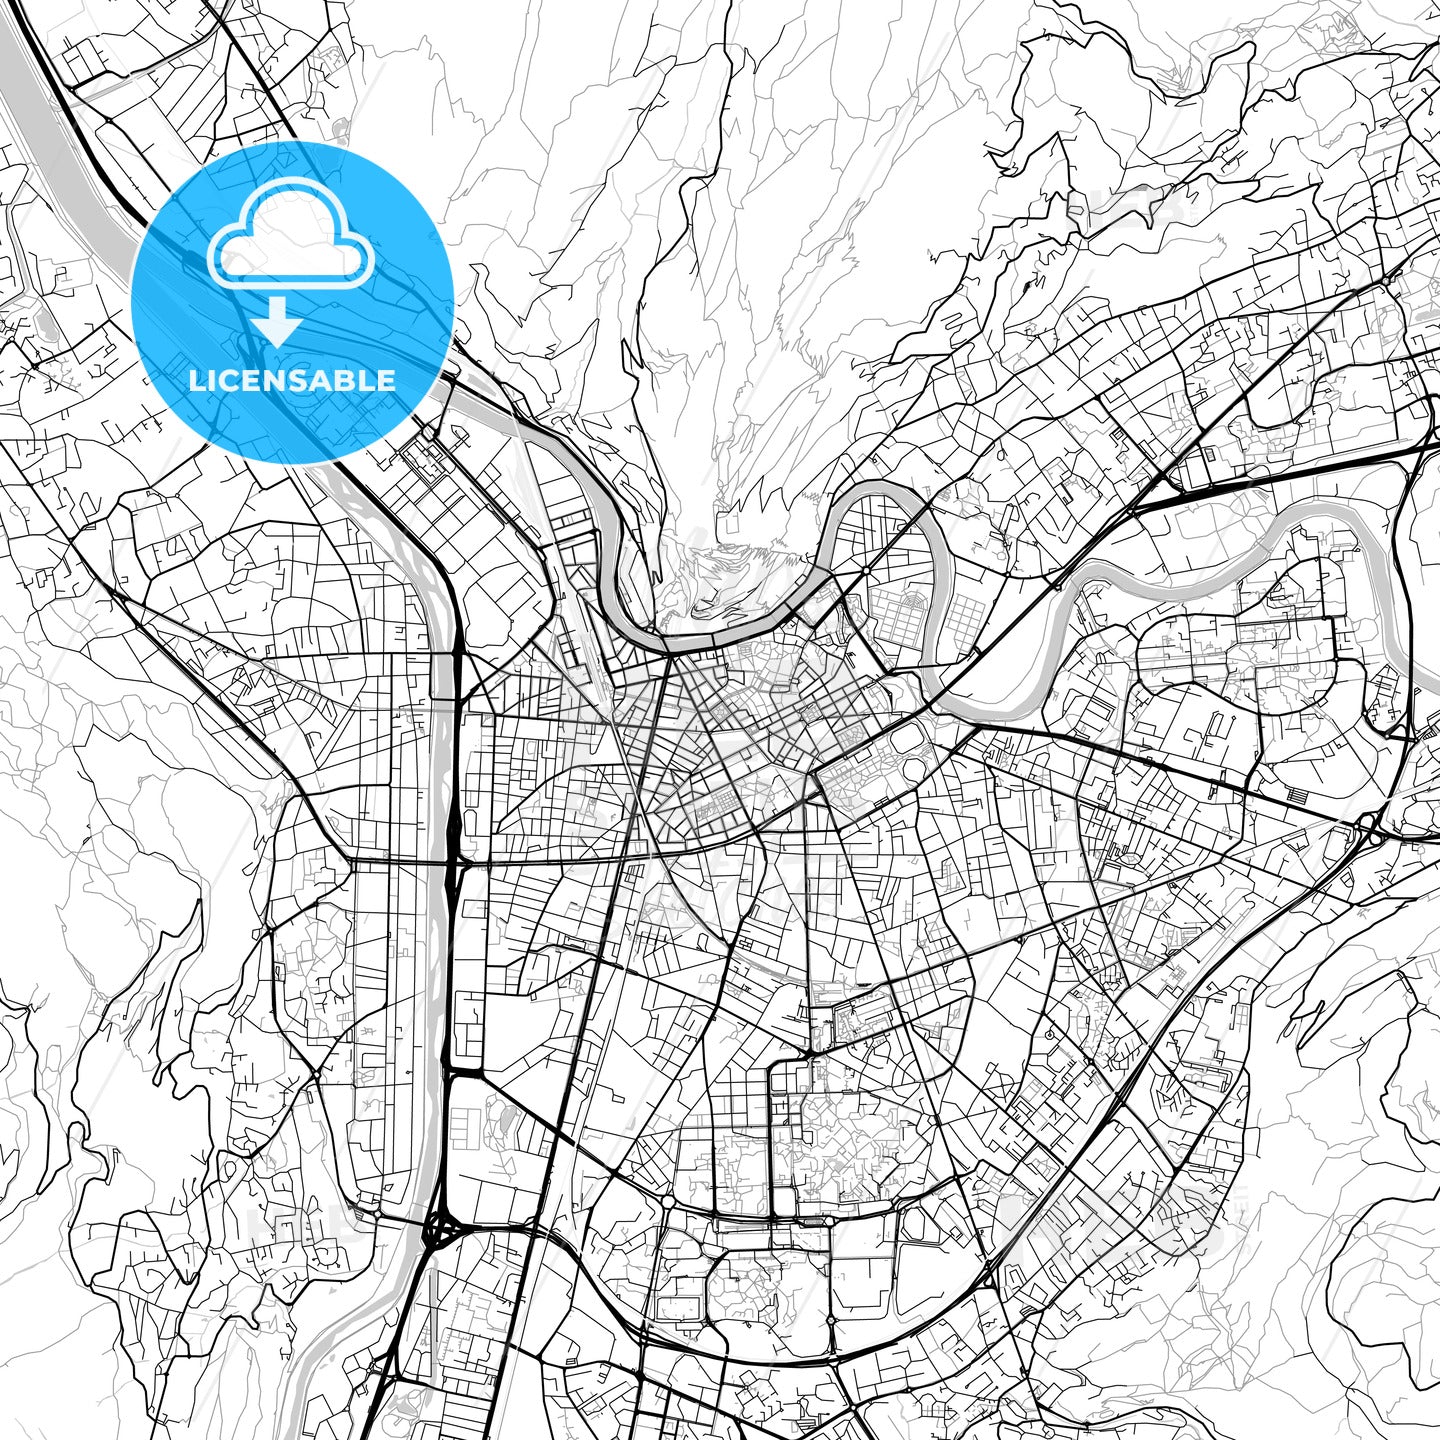 Grenoble, Isère, downtown map, light